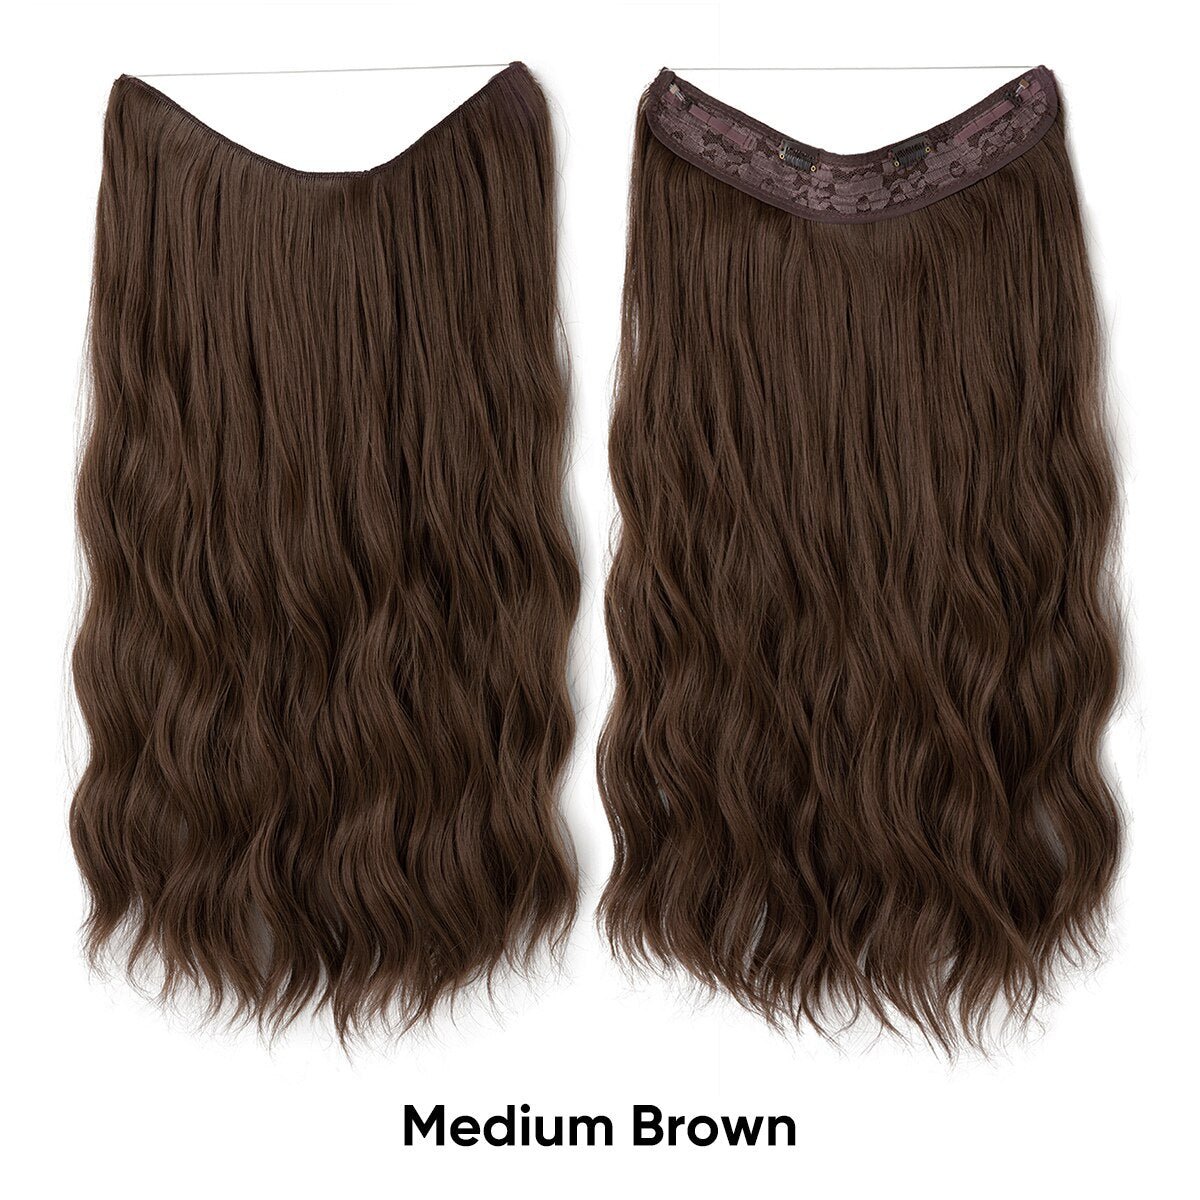 Secret Hair Invisible Halo 2.0 Hair Extensions Medium Brown - BEAUTY BELLO®